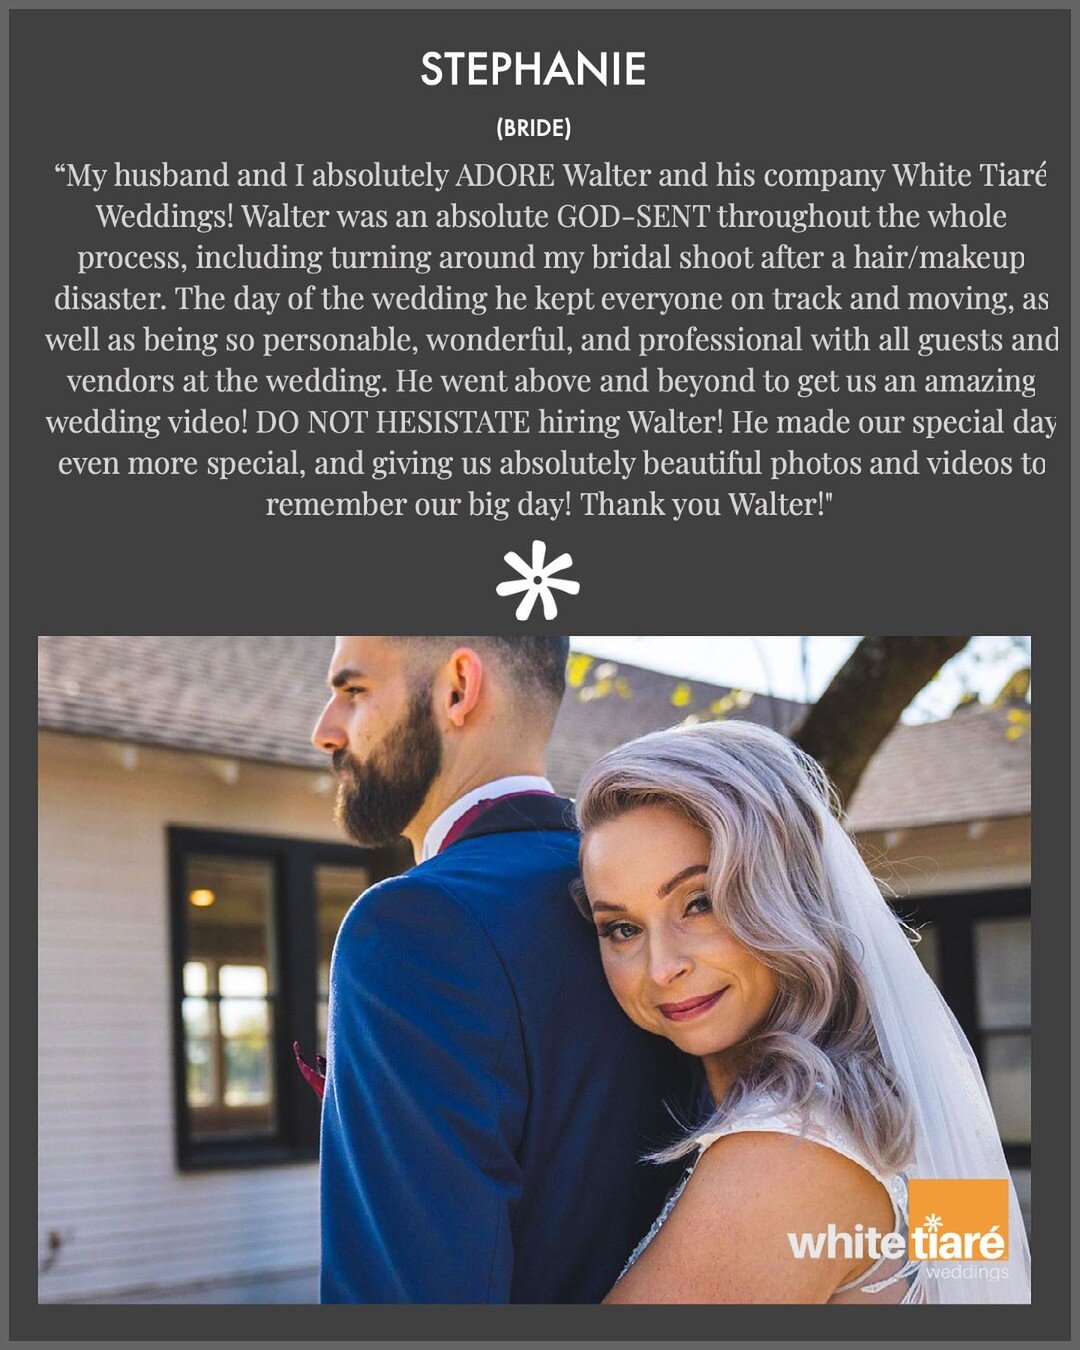 RAVE REVIEWS!
We absolutely love it when our couples give us reviews. This wedding was EVERYTHING! So many curveballs thrown at us on the wedding day but we didn&rsquo;t let that phase us. Not even a blink. We just smiled, adapt to the situation and 